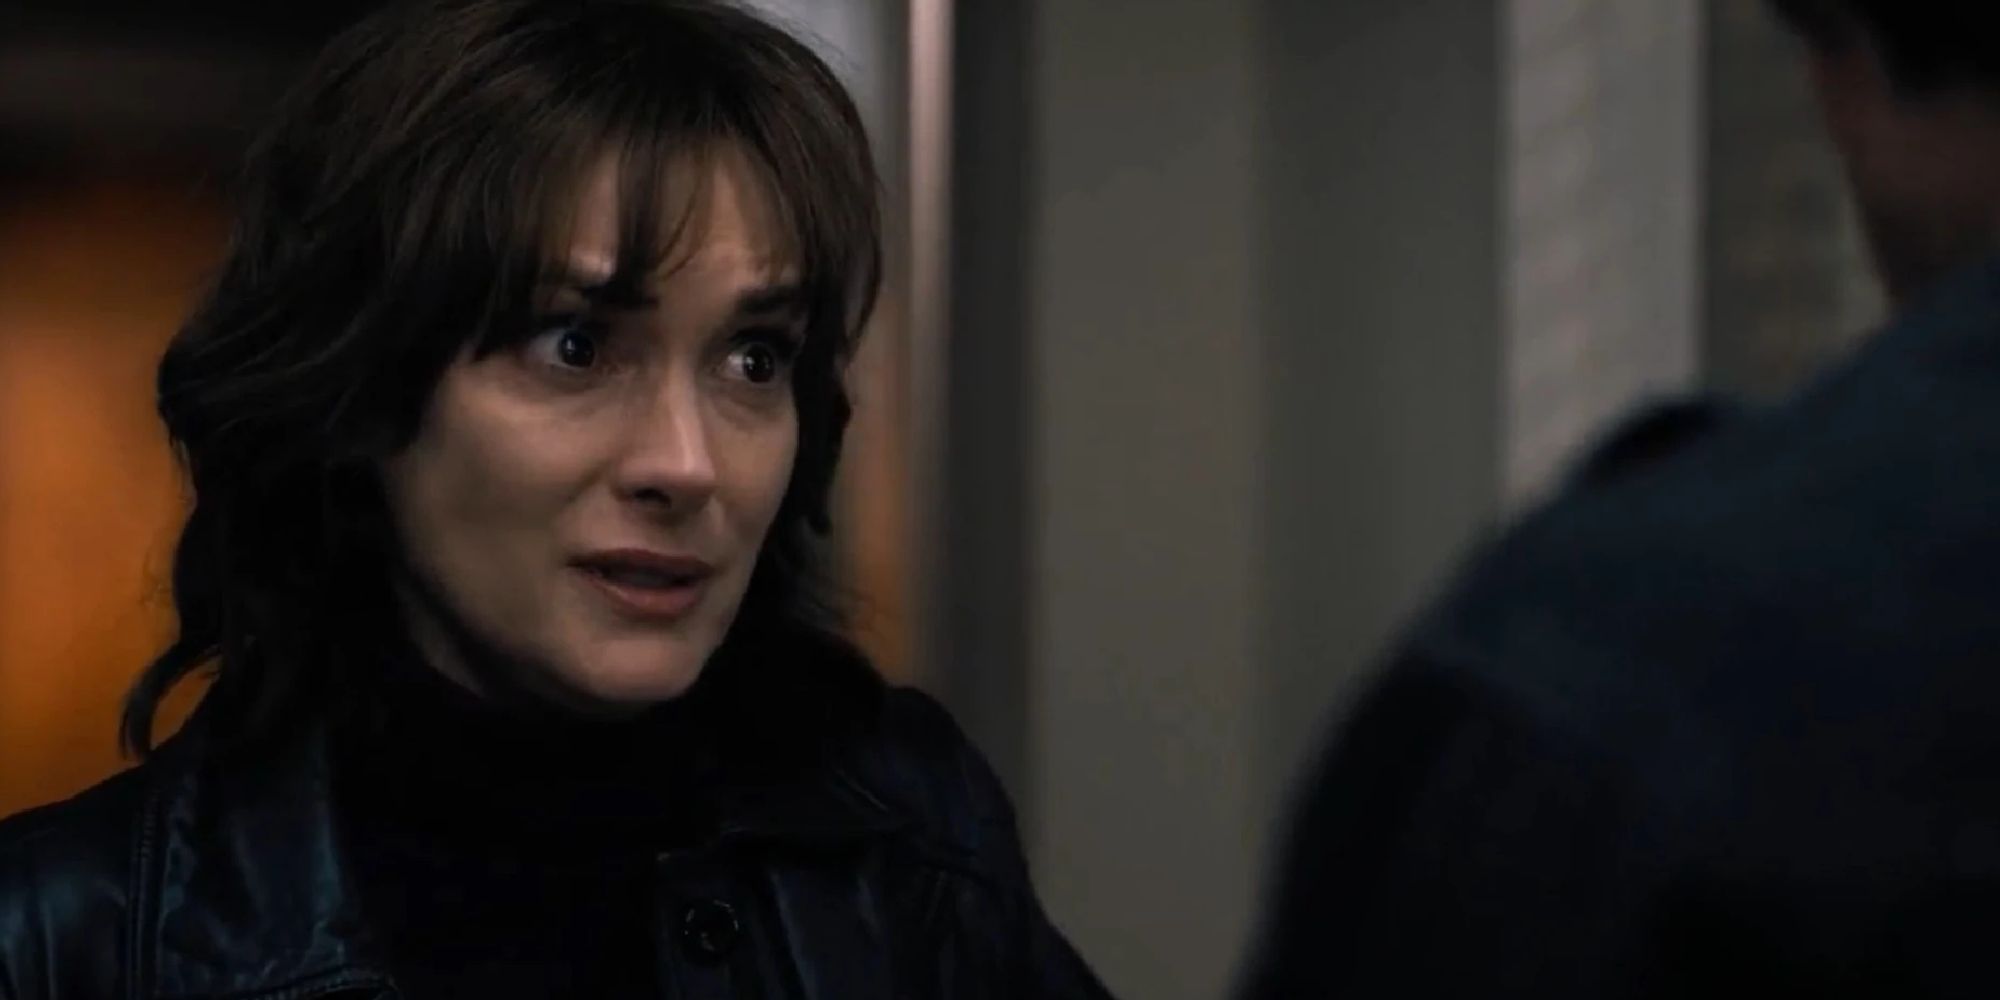 Joyce talking to Jonathan in the hallway of a police station in season 1